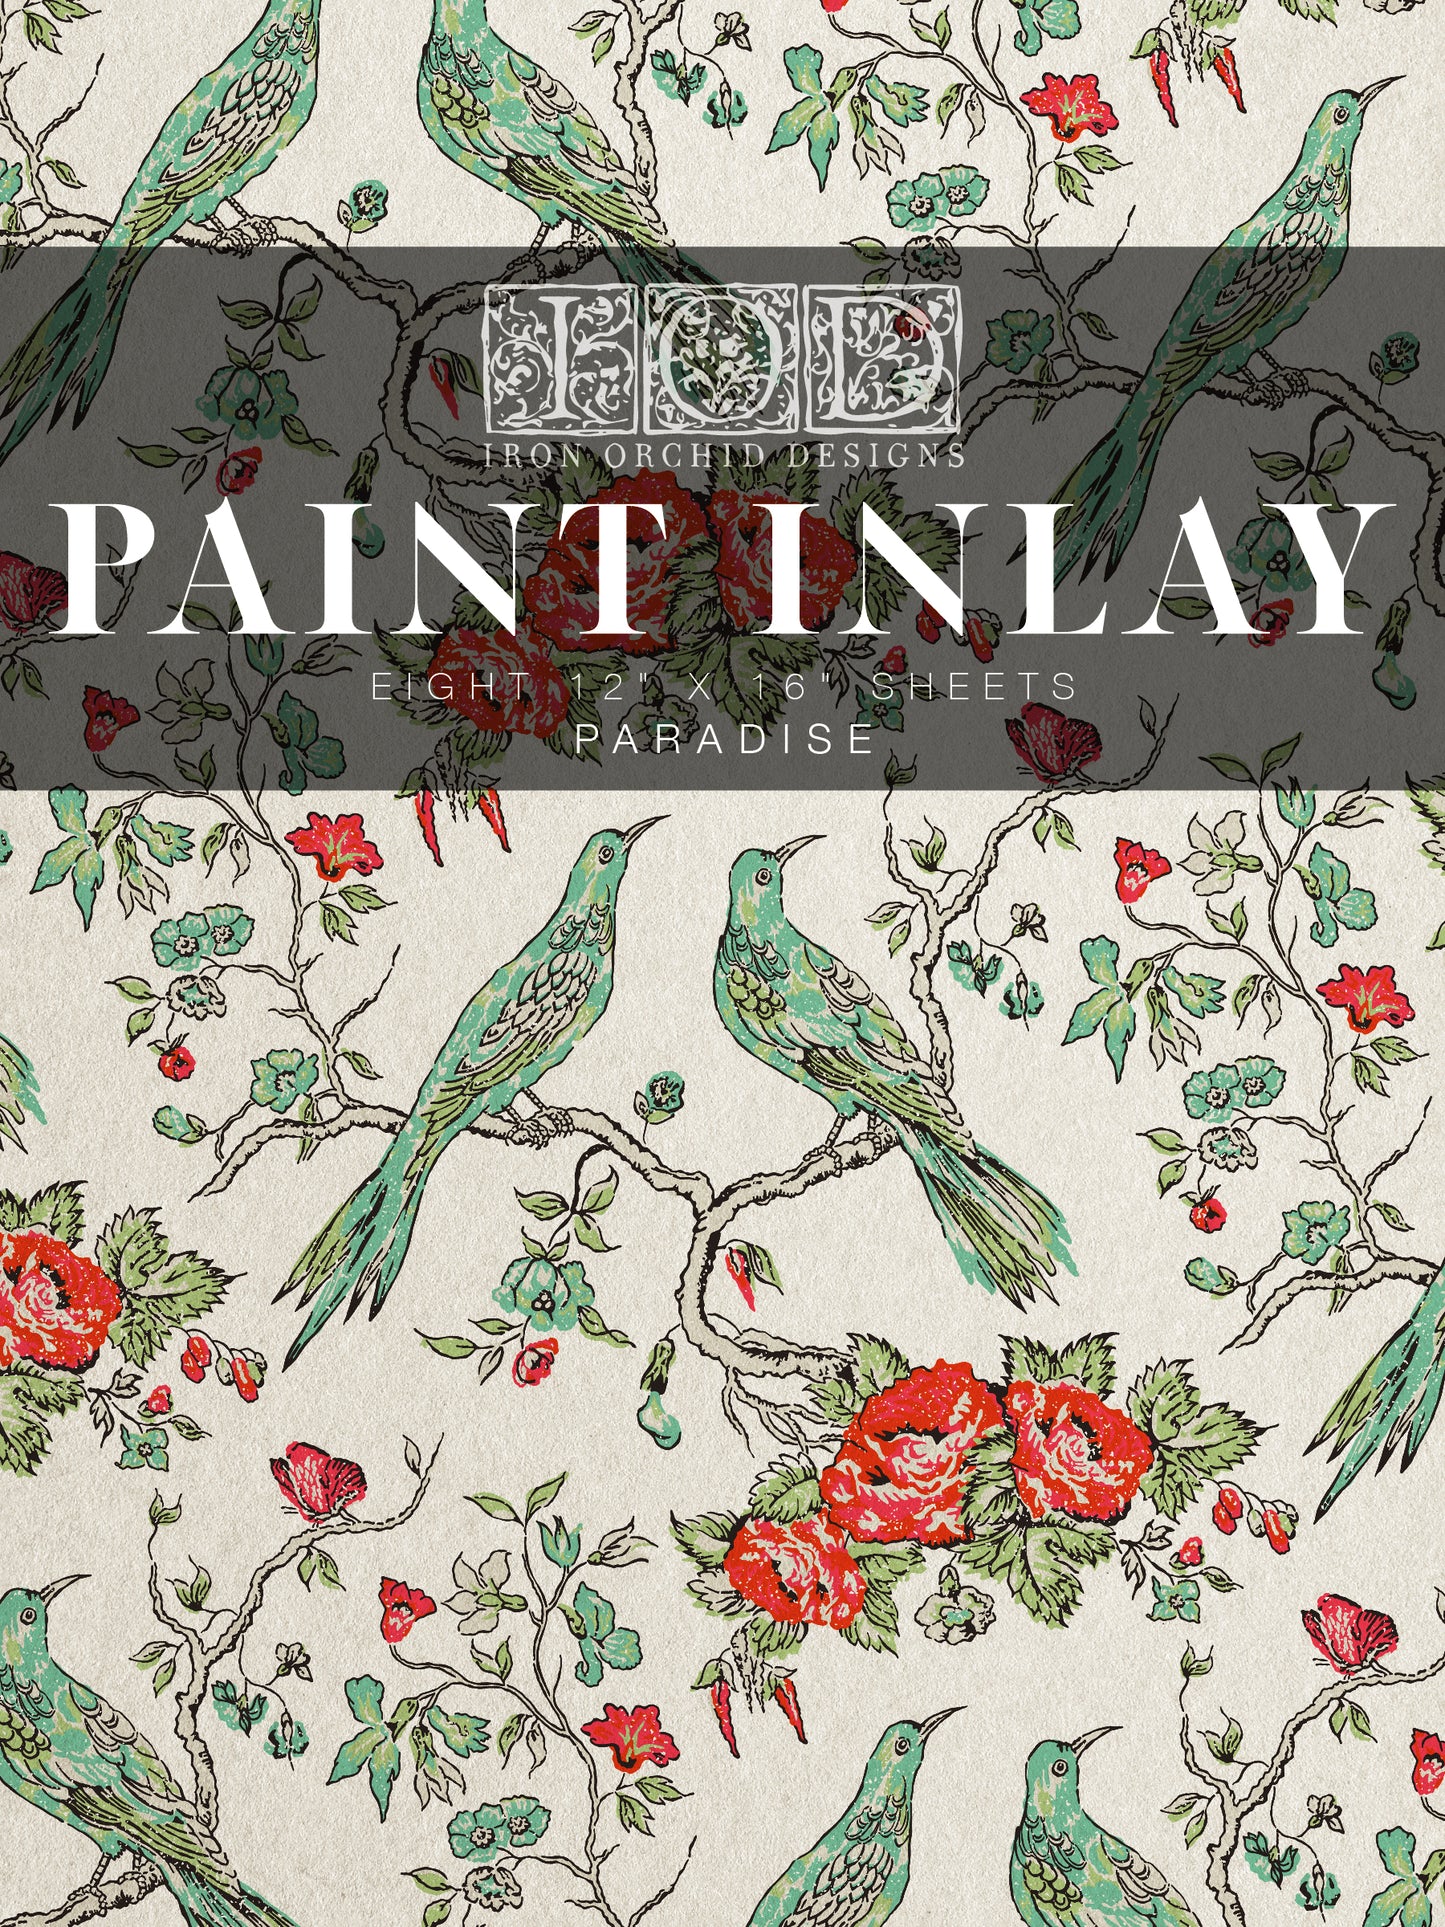 Paradise Iron Orchid Designs Paint Inlay